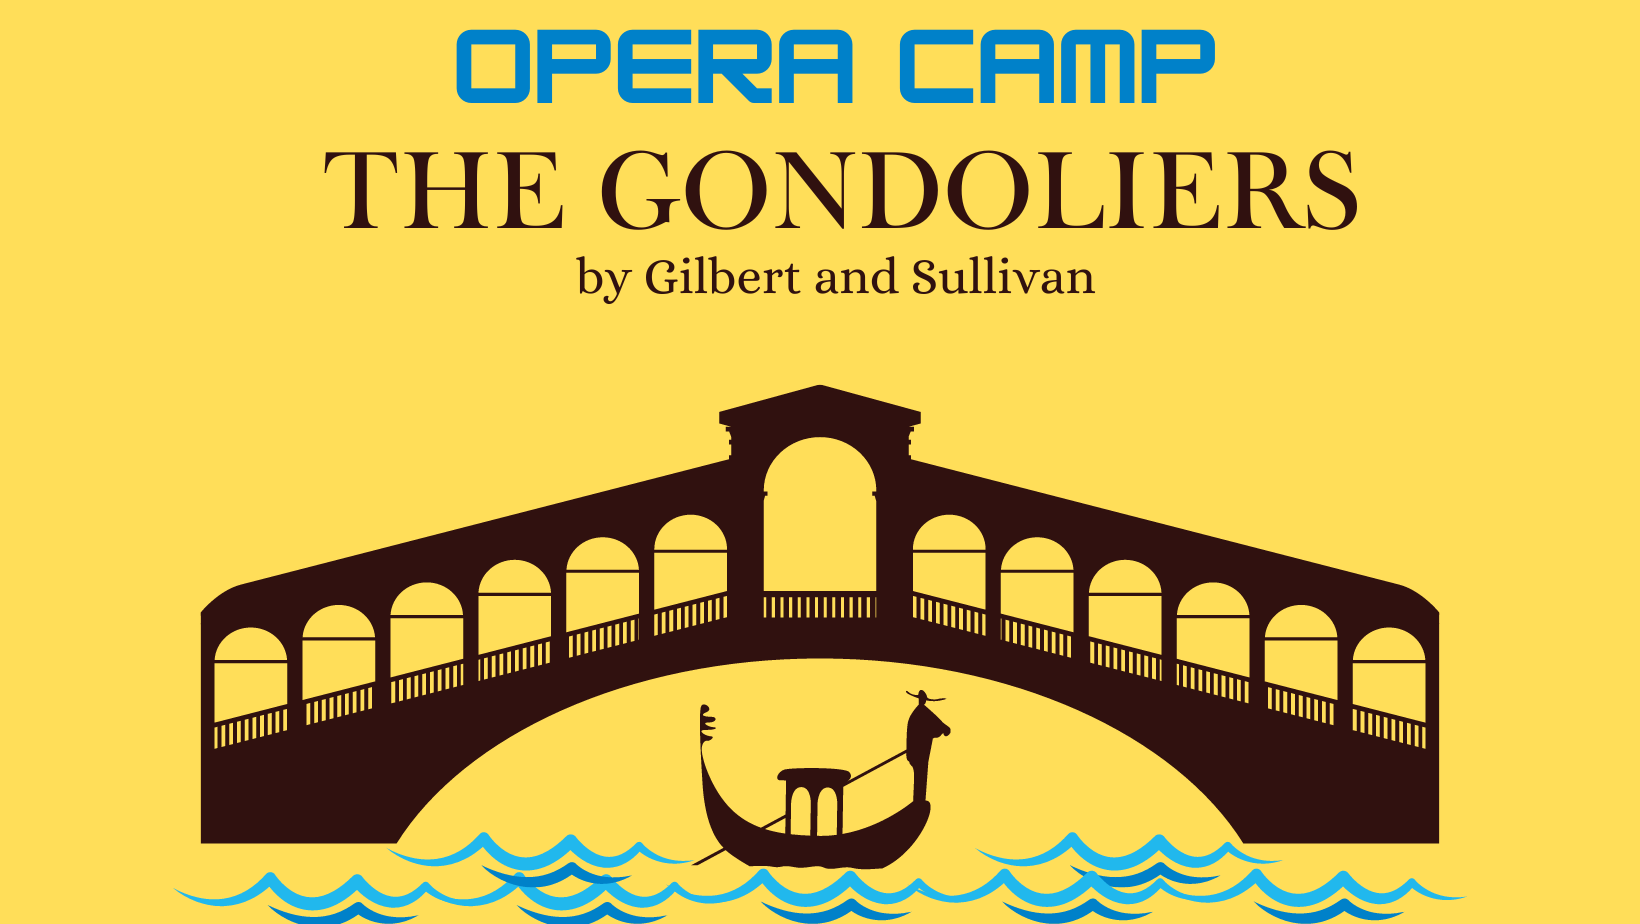  Text reads: Opera Camp The Gondoliers by Gilbert and Sullivan. The image shows the outline of a gondola under a bridge 